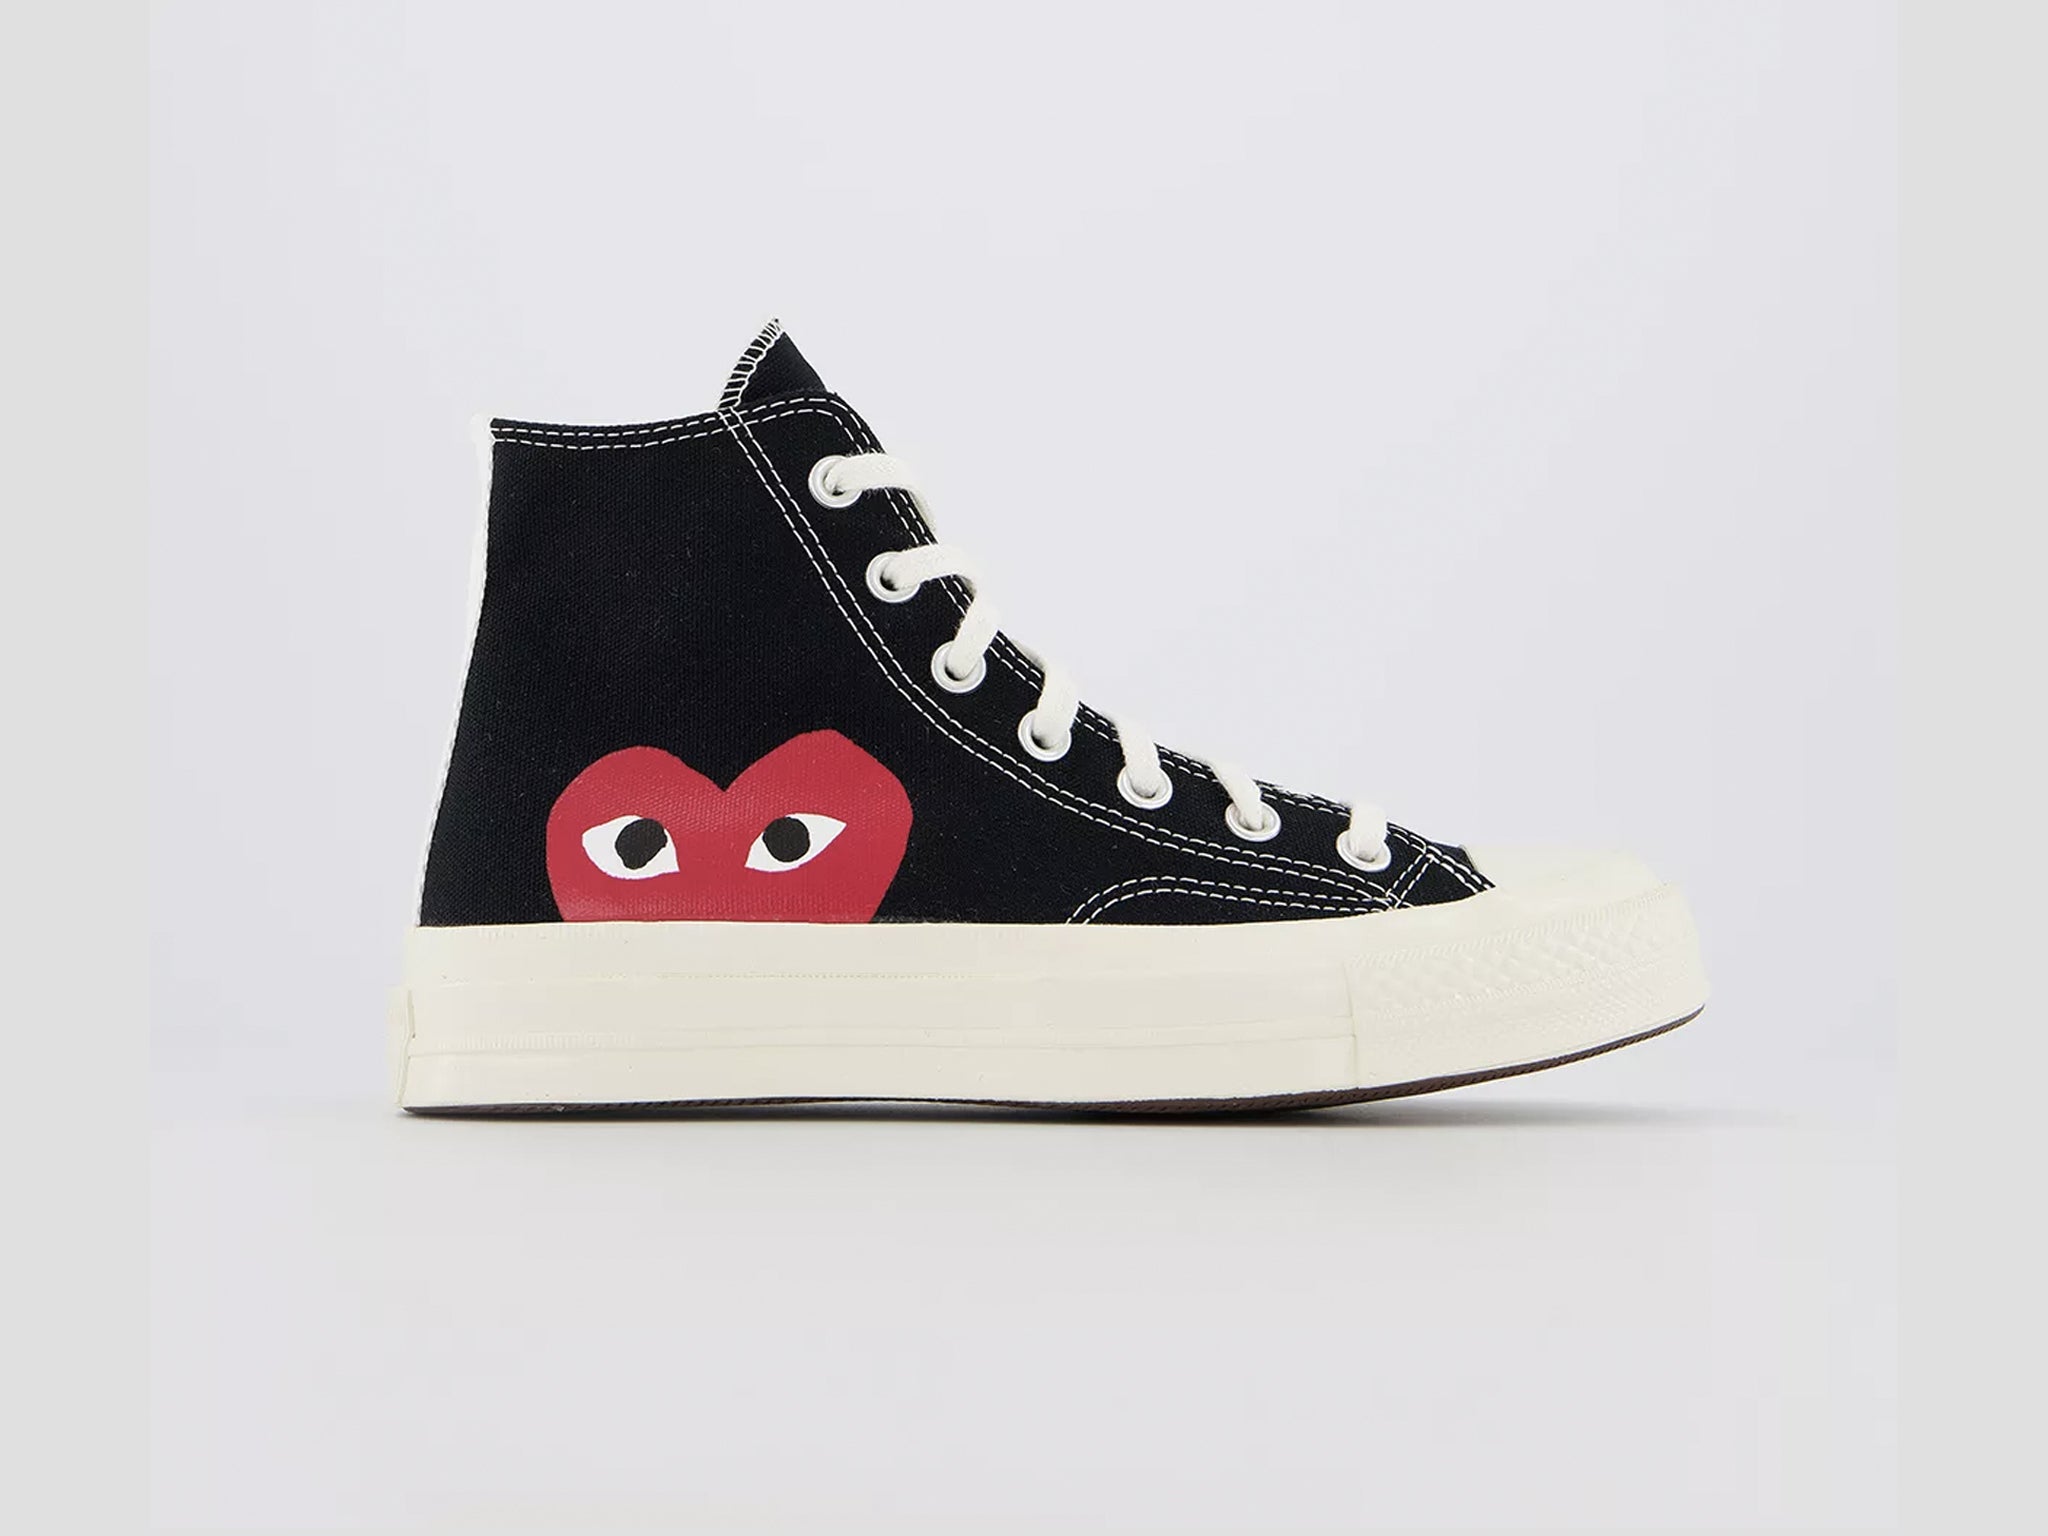 Converse buying High tops, run star, Comme Des and more | The Independent